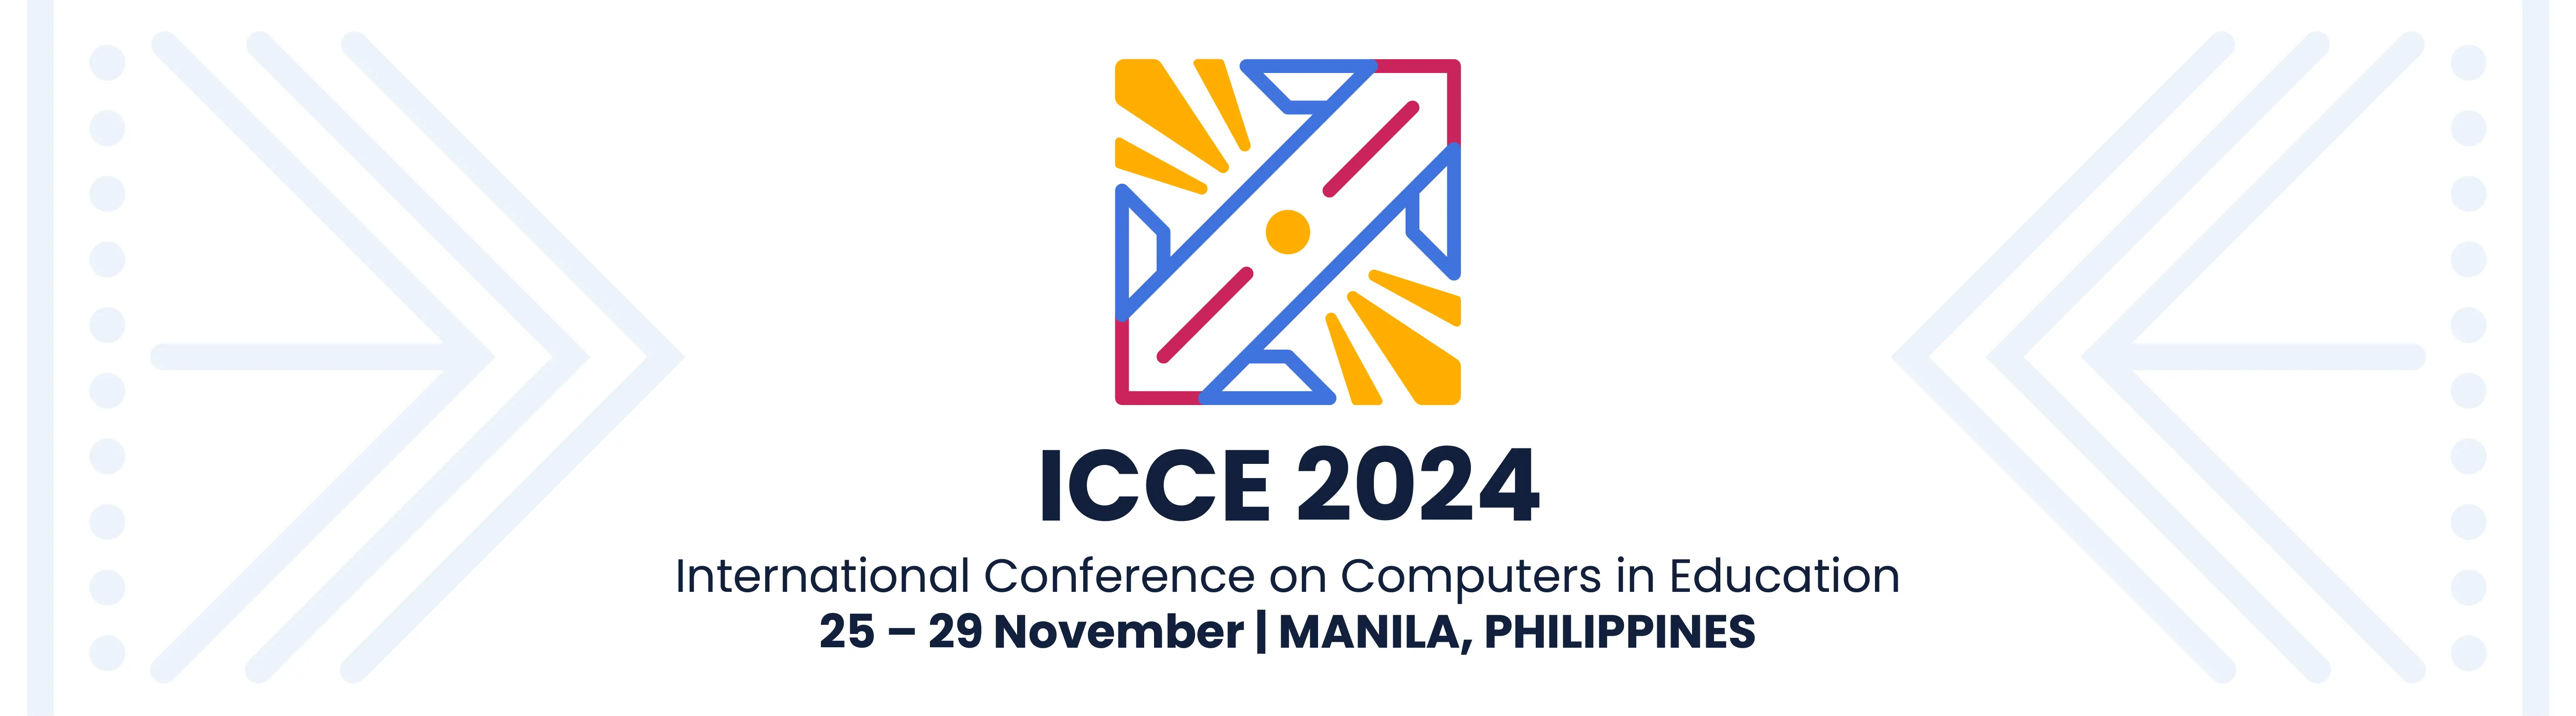 ICCE 2023 (31st International Conference on Computers in Education)